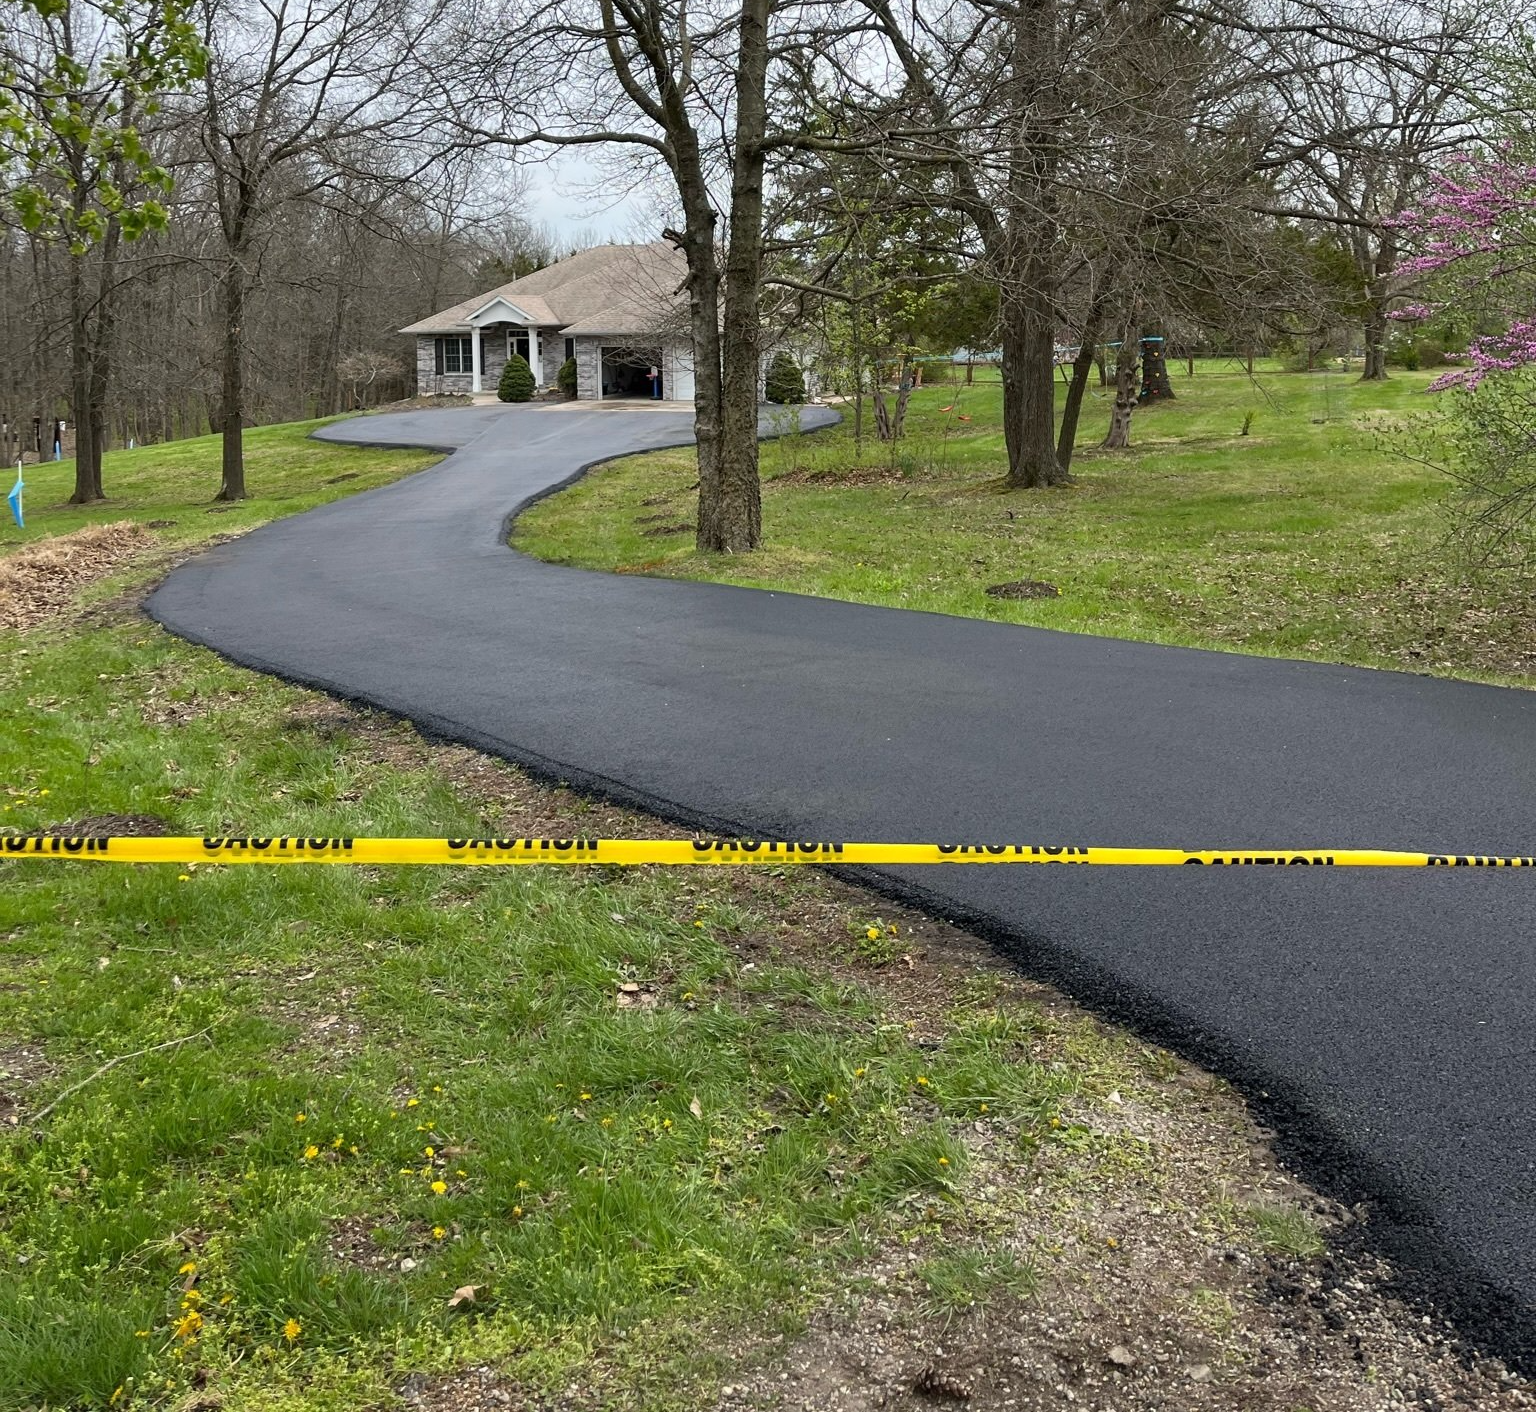 Don’t Let an Ugly Driveway Impact Your Moberly, MO Home’s Curb Appeal. Get Started With MoSEAL.